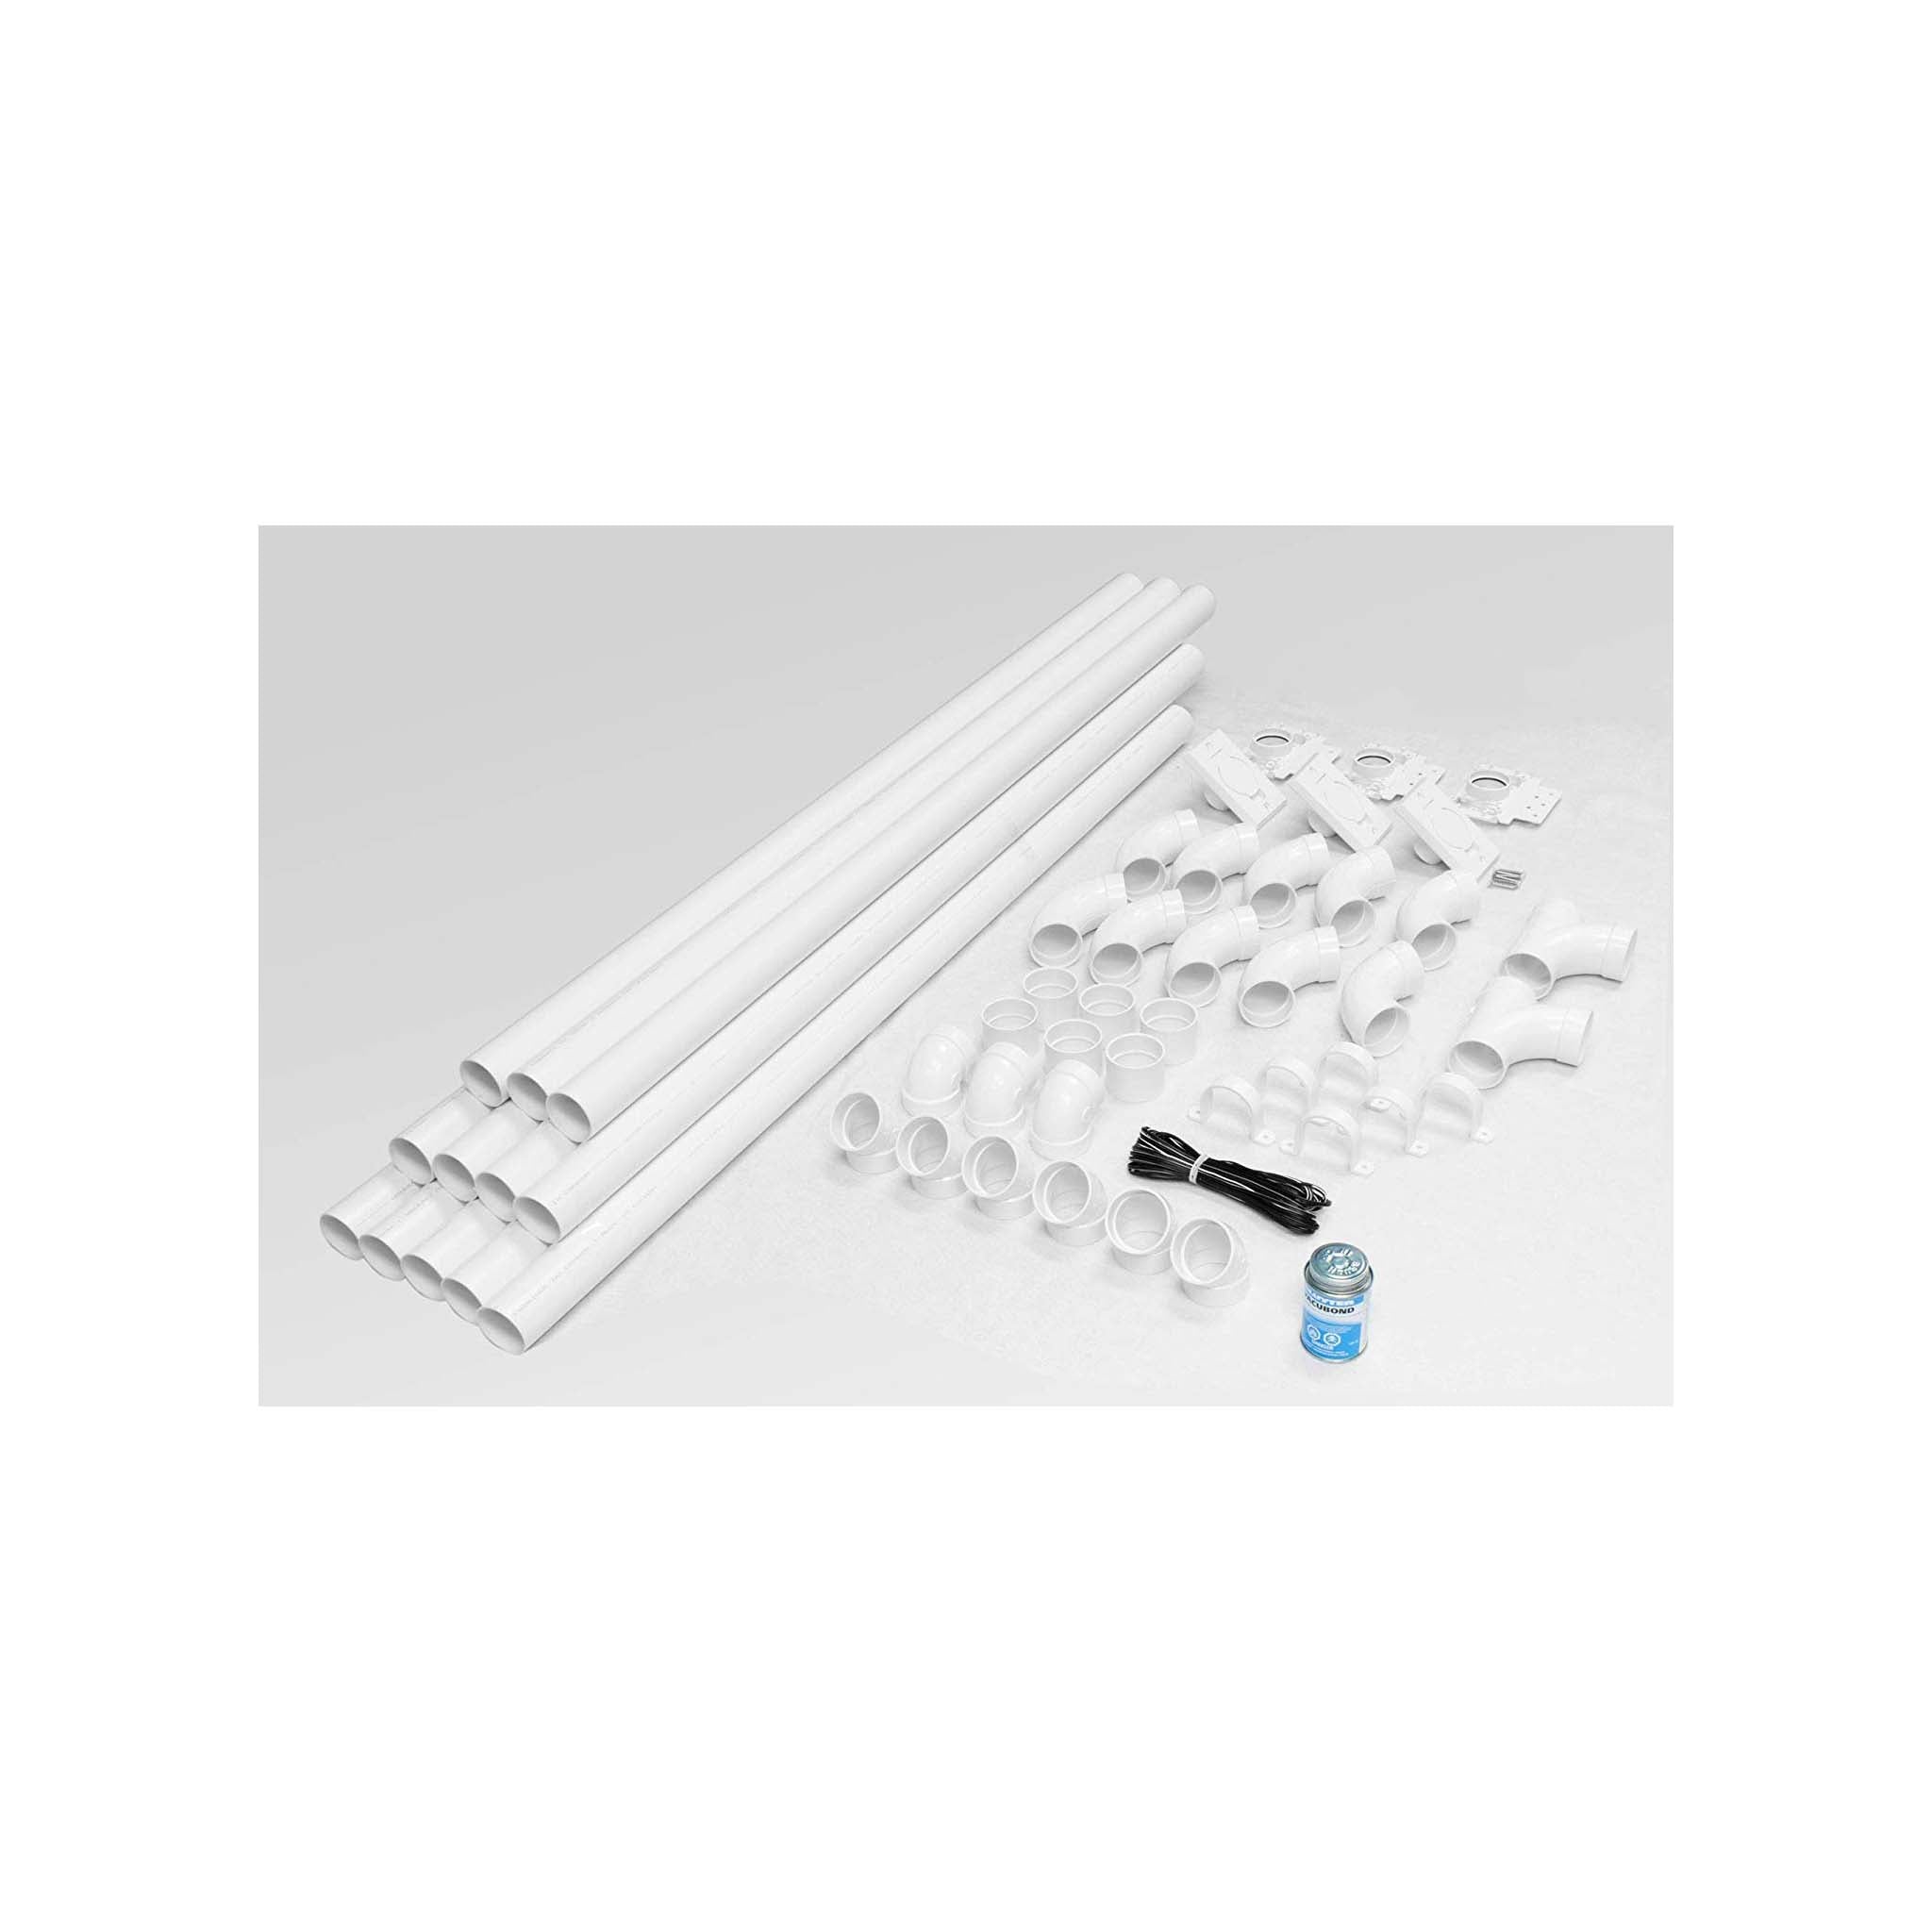 Central Vacuum Inlet Installation Kit for all homes with 2" PVC Piping